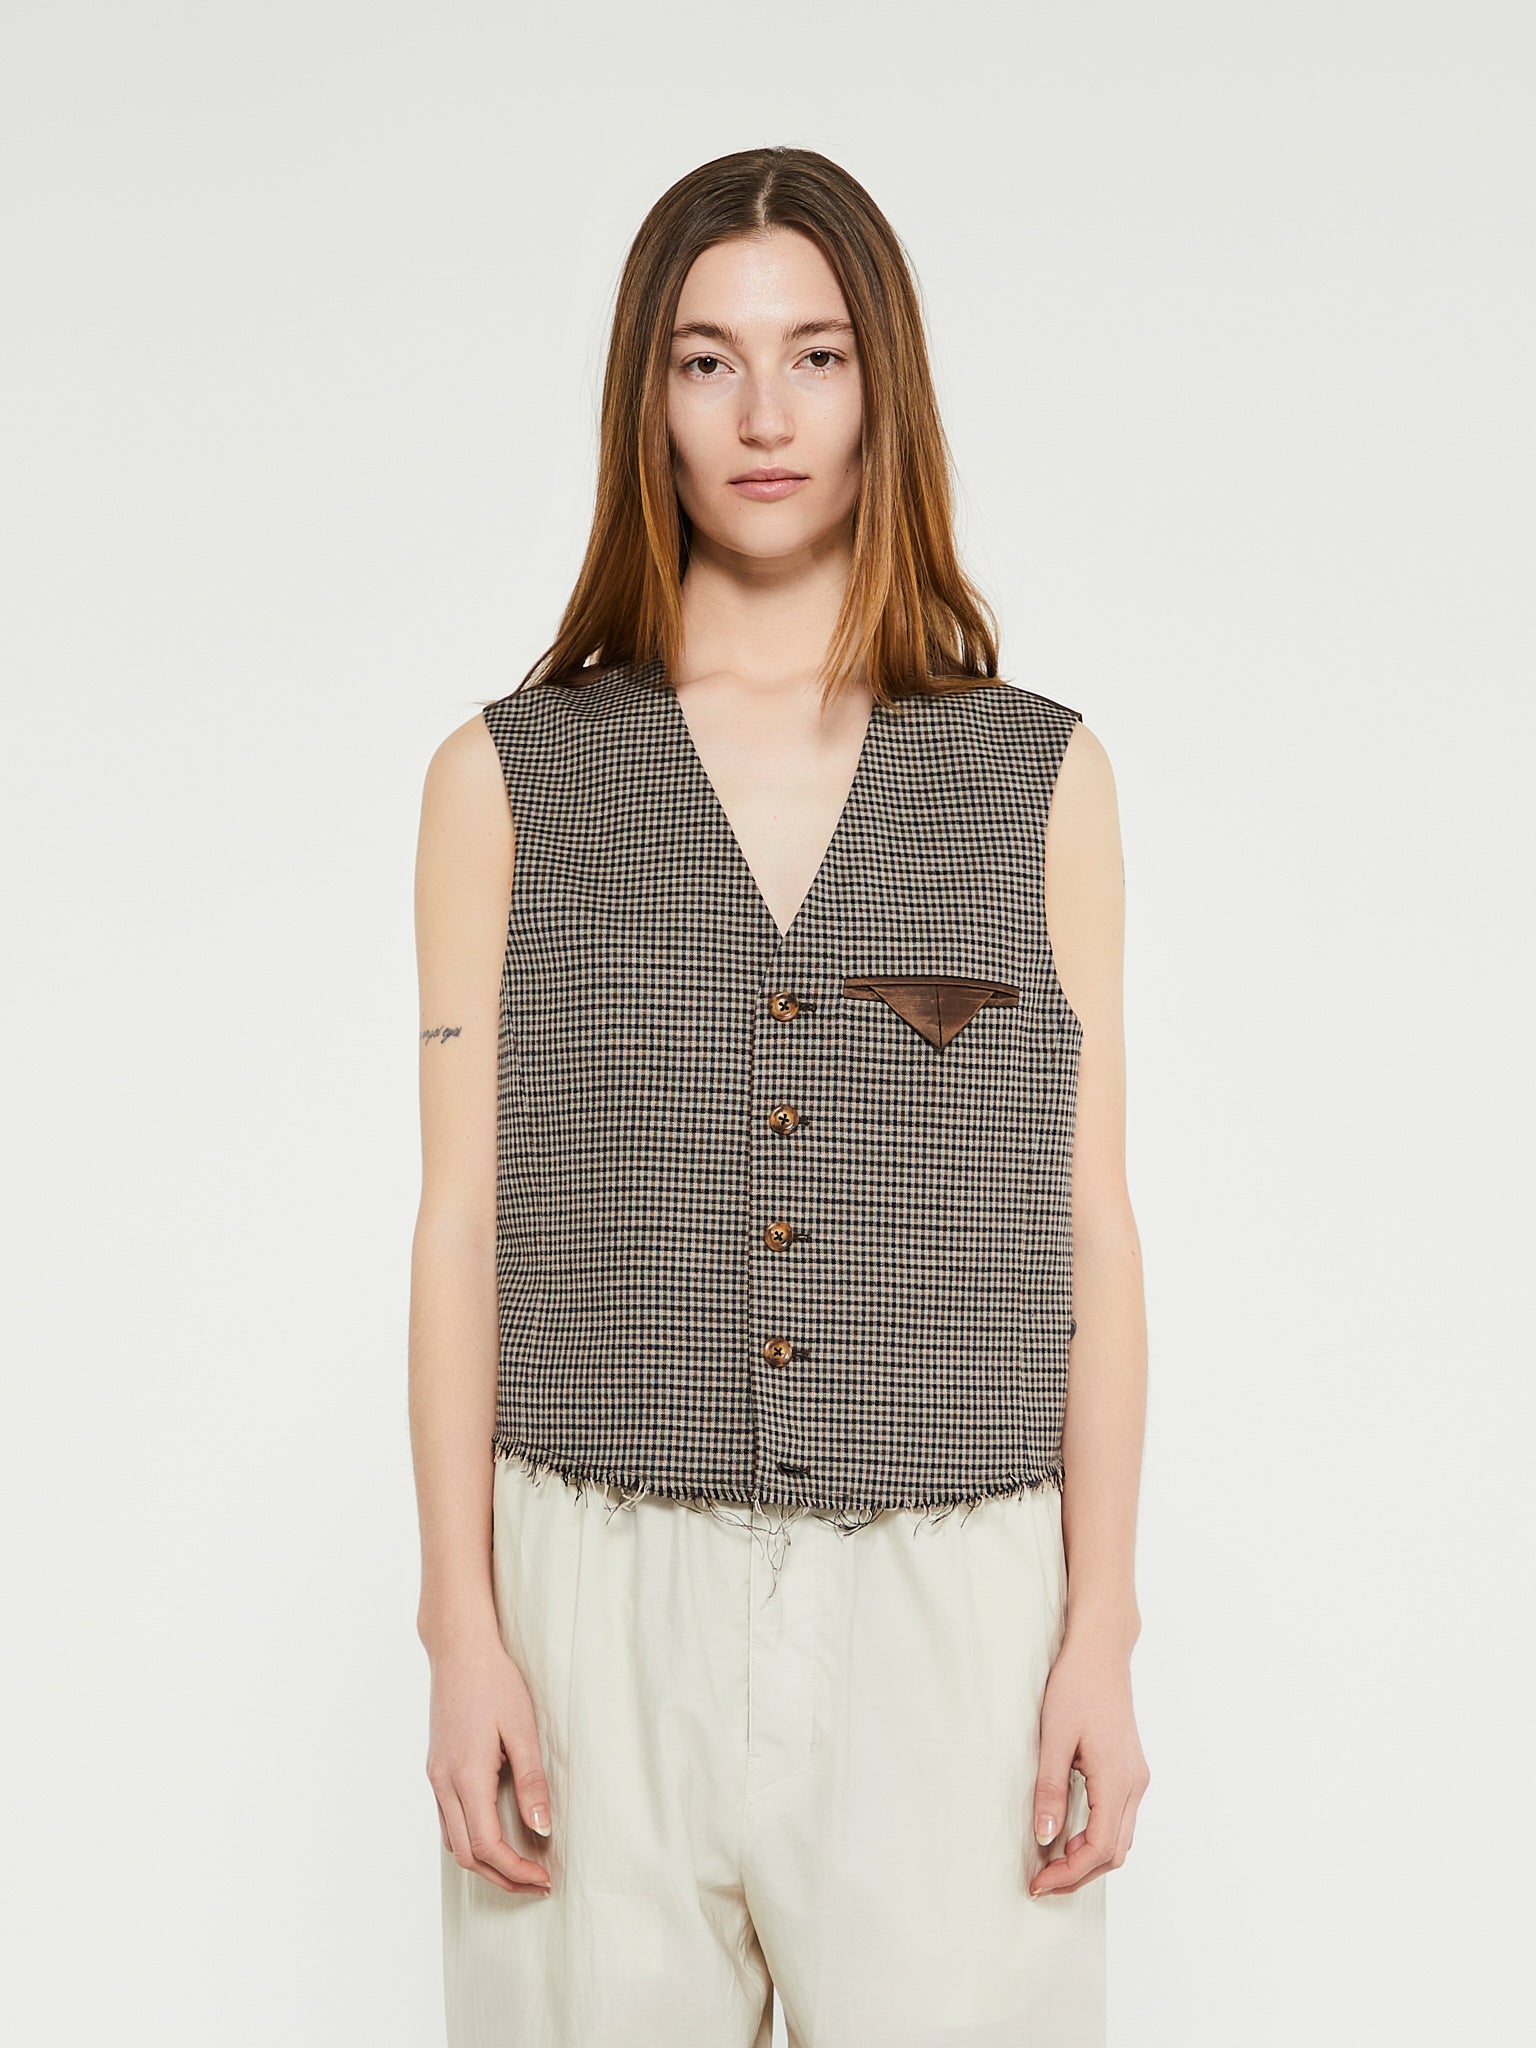 Our Legacy - Cut Waistcoat in Brown Check